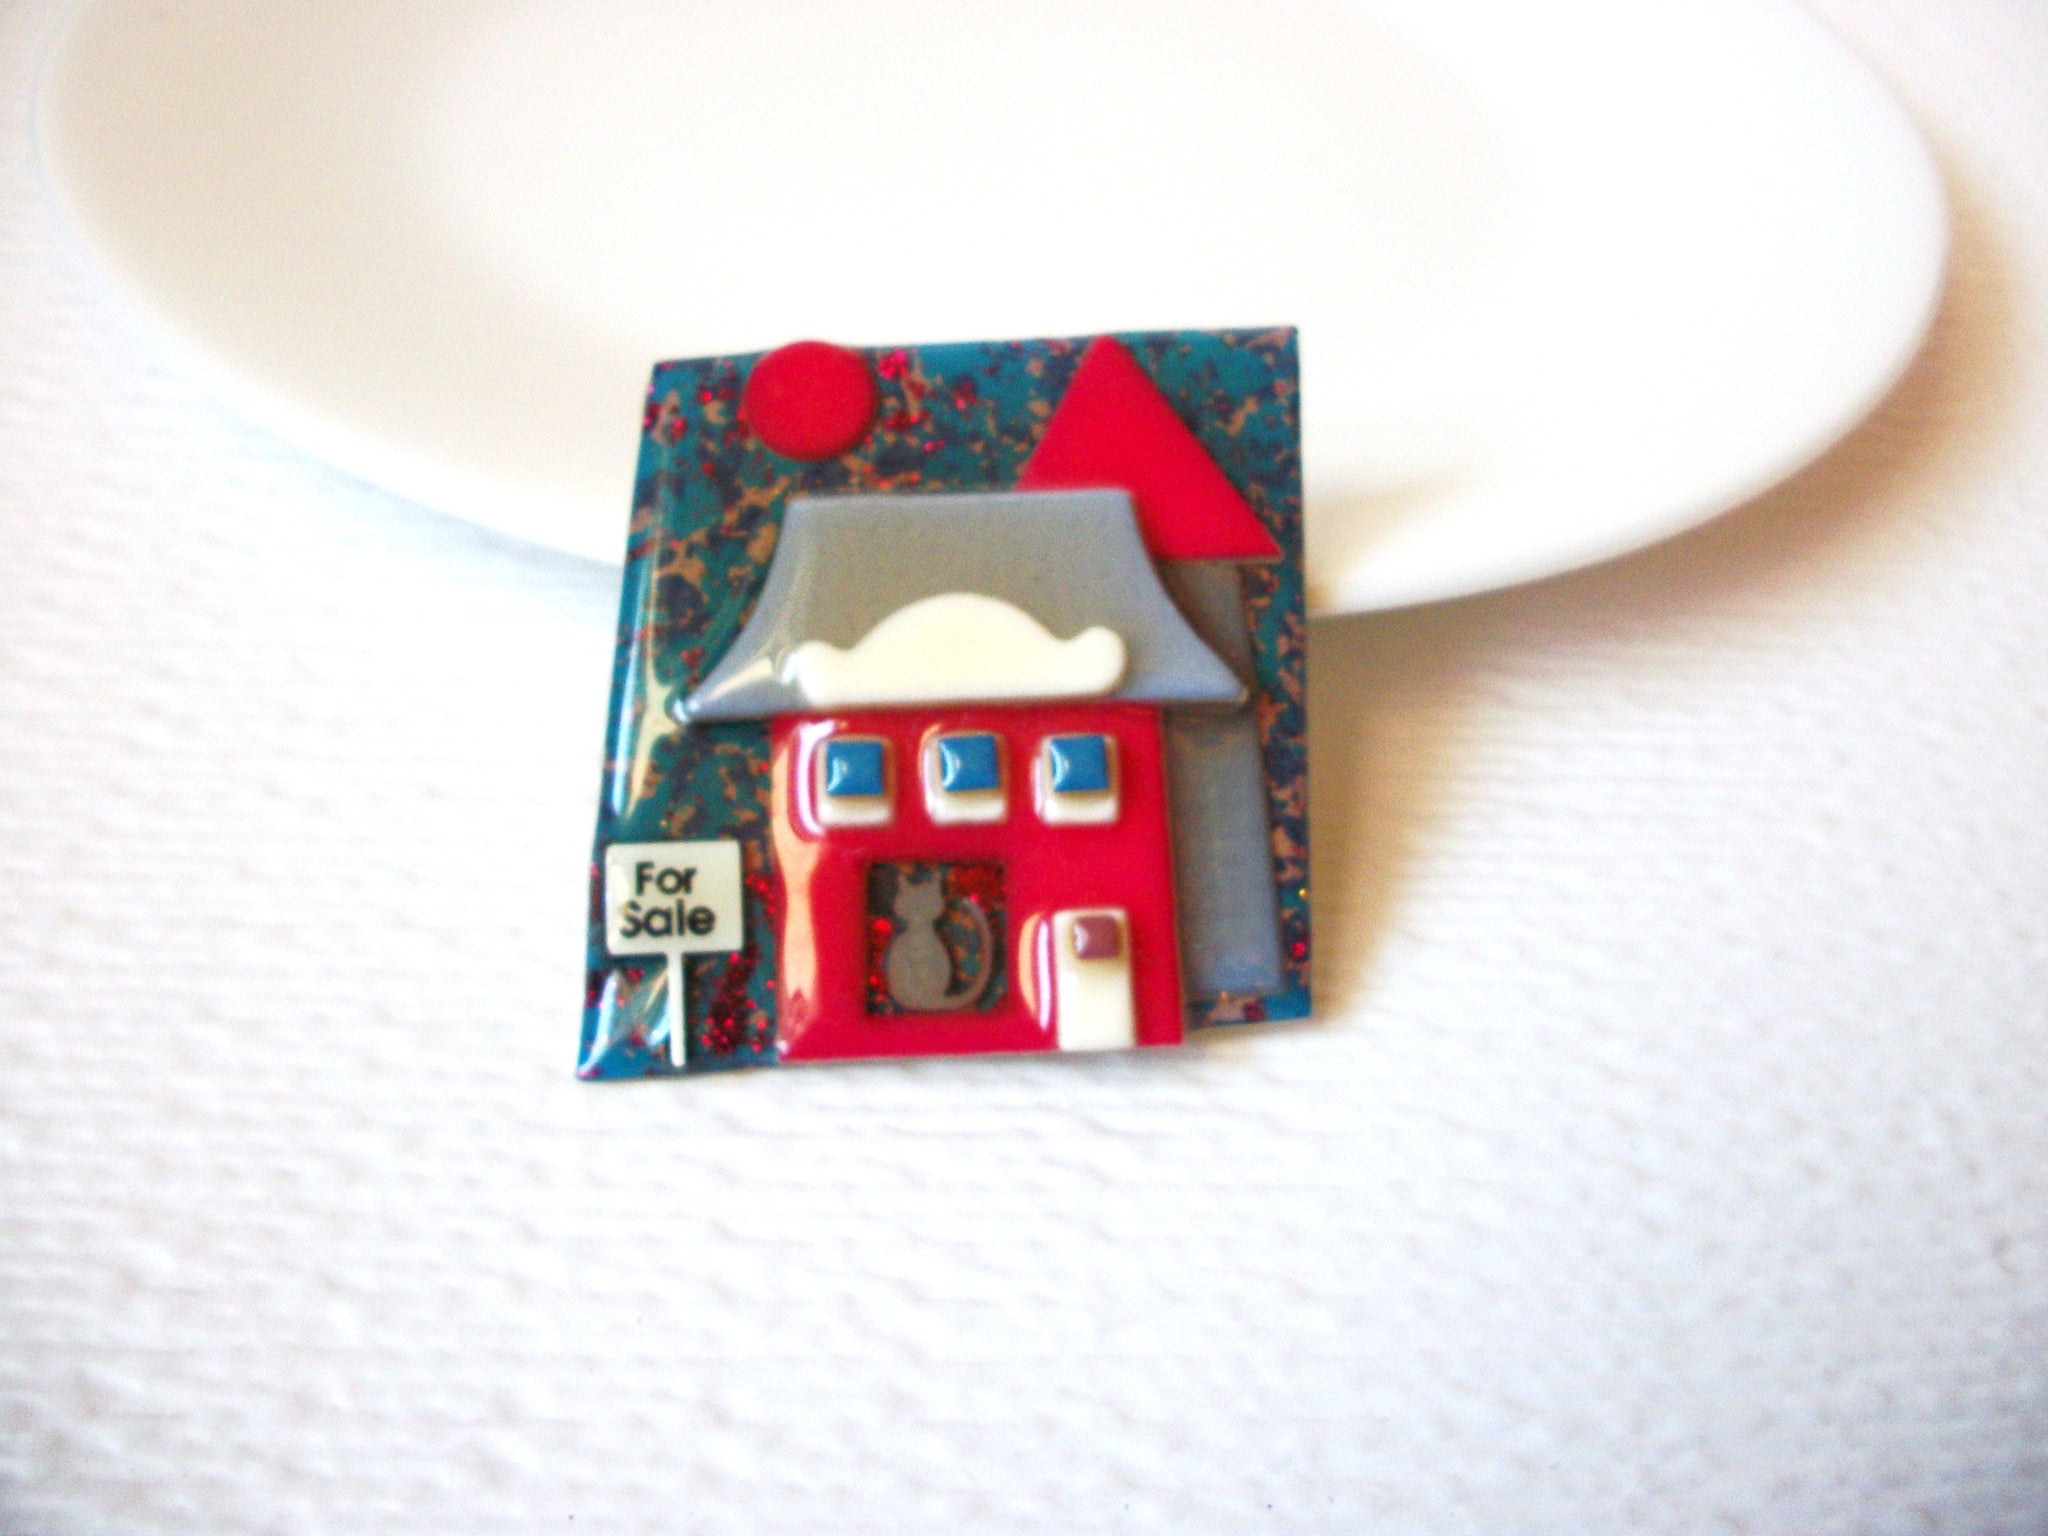 Vintage Lucinda House Pins For Sale Pins By Lucinda 102420